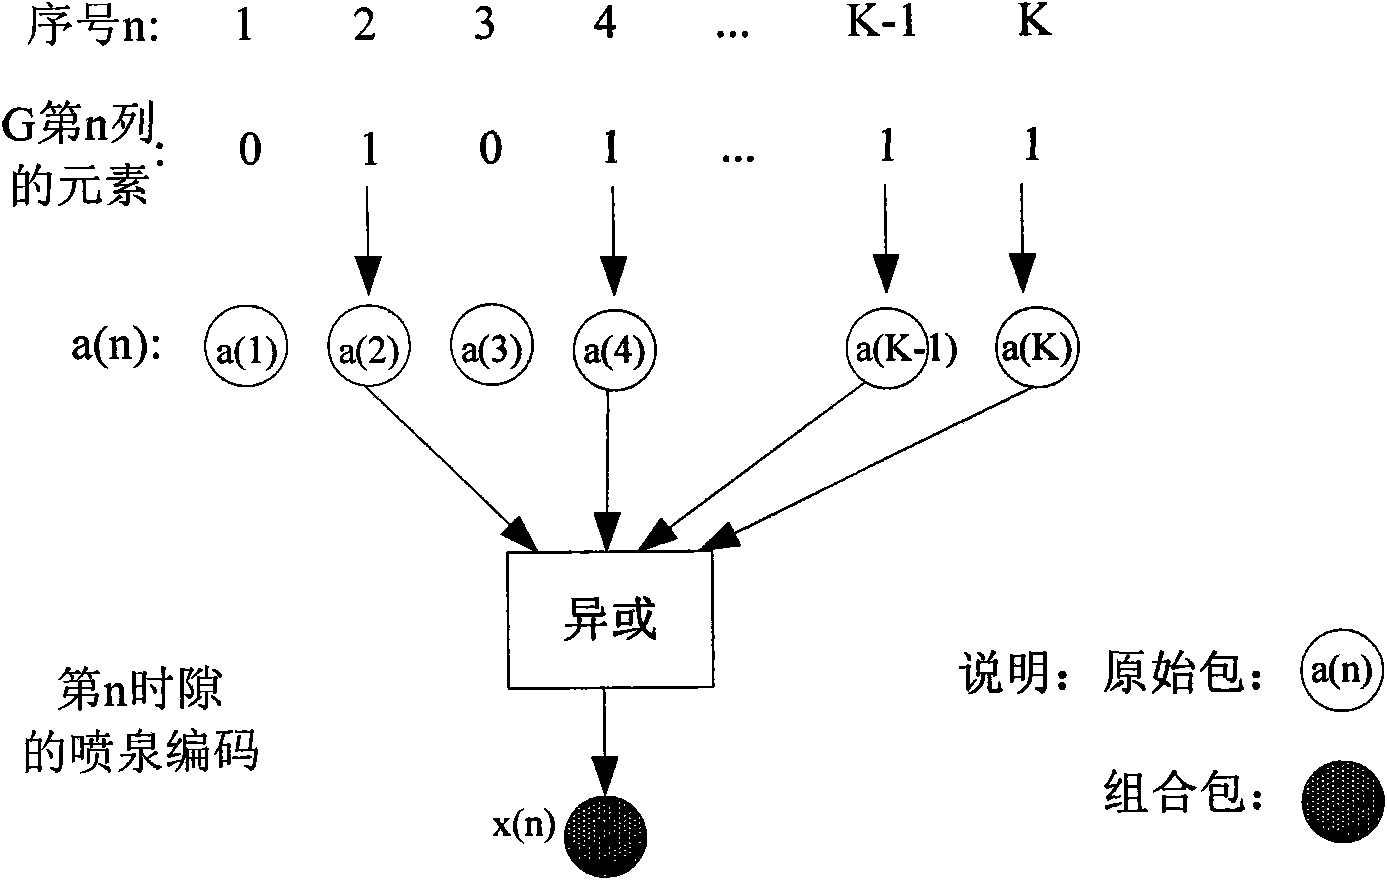 Self-adapting fountain code multicast transmission system based on modulation